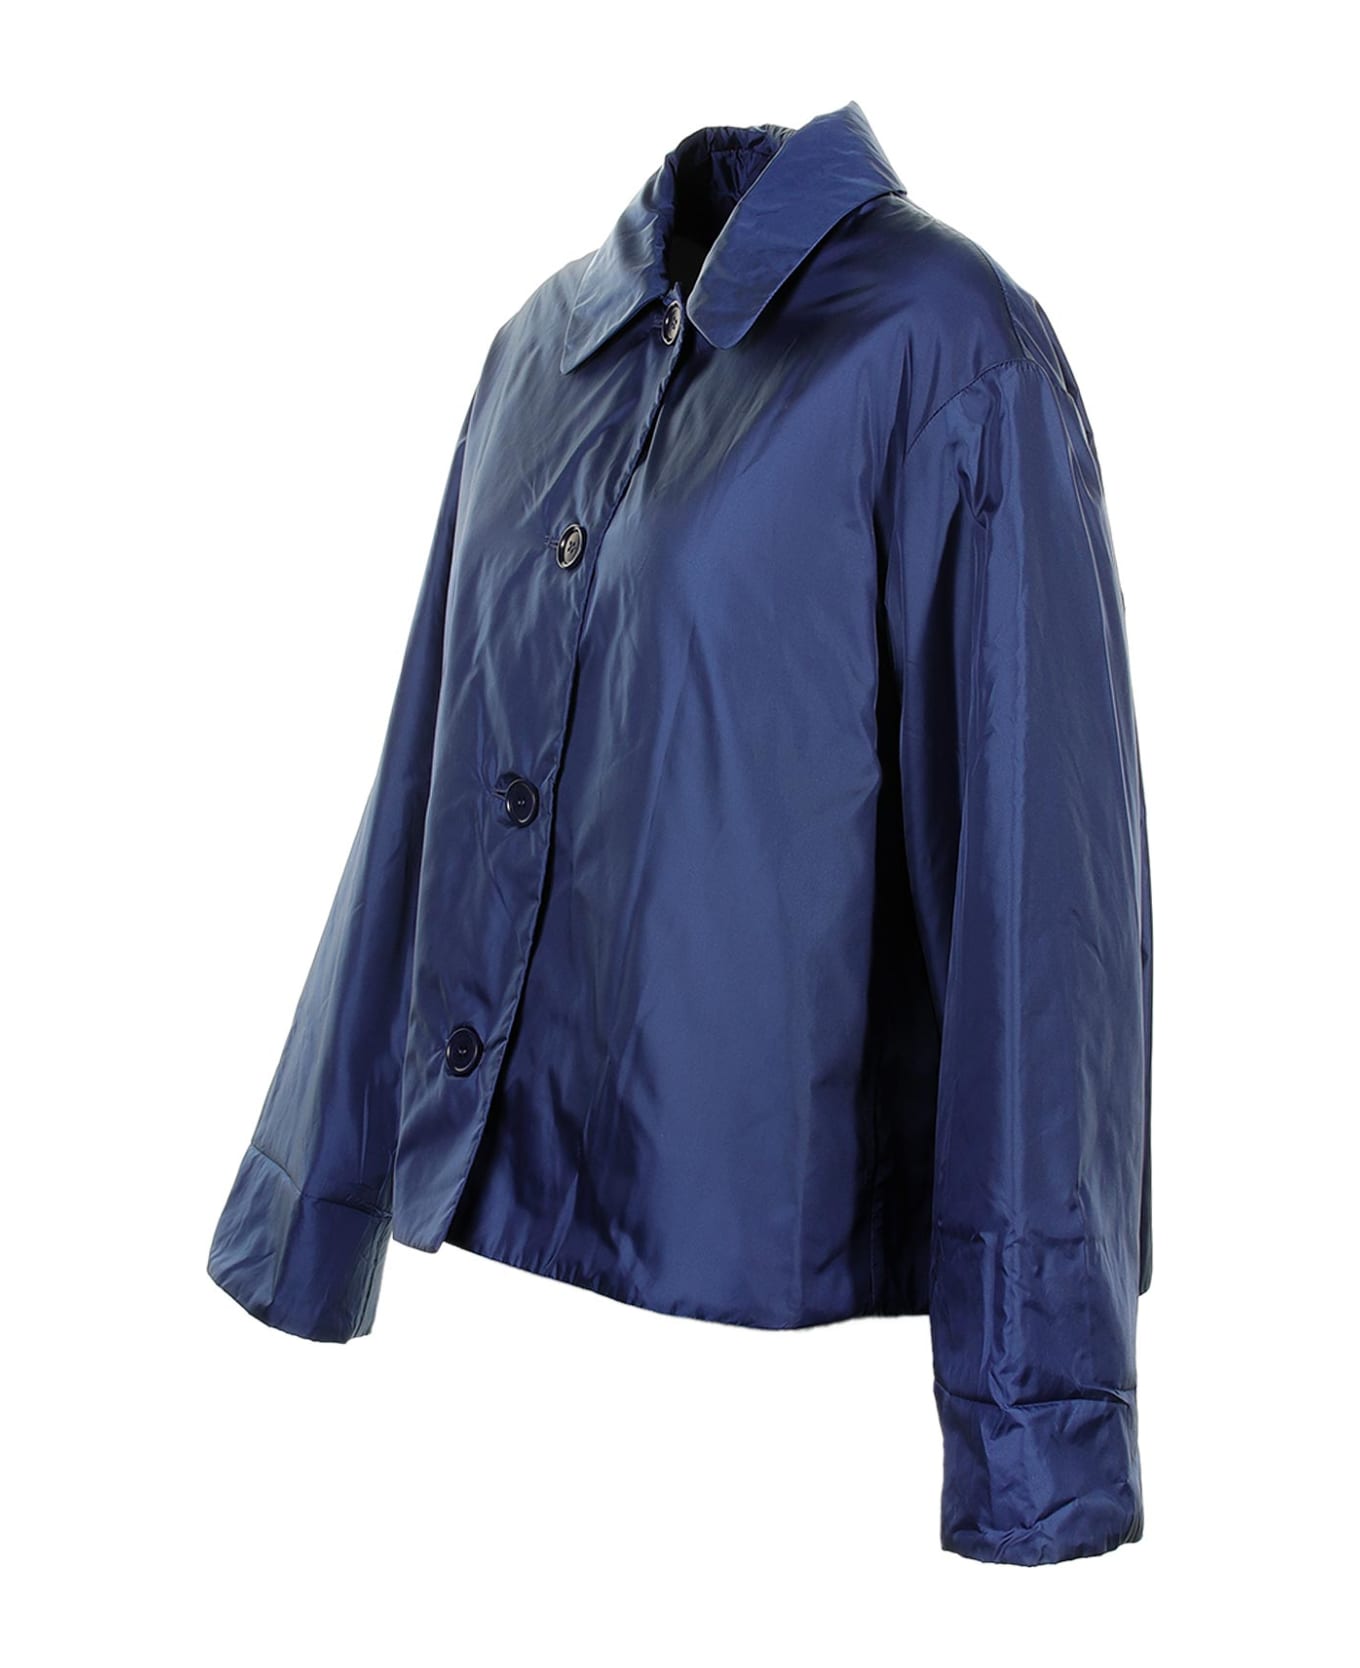 Aspesi Blue Jacket With Buttons - BLUETTE